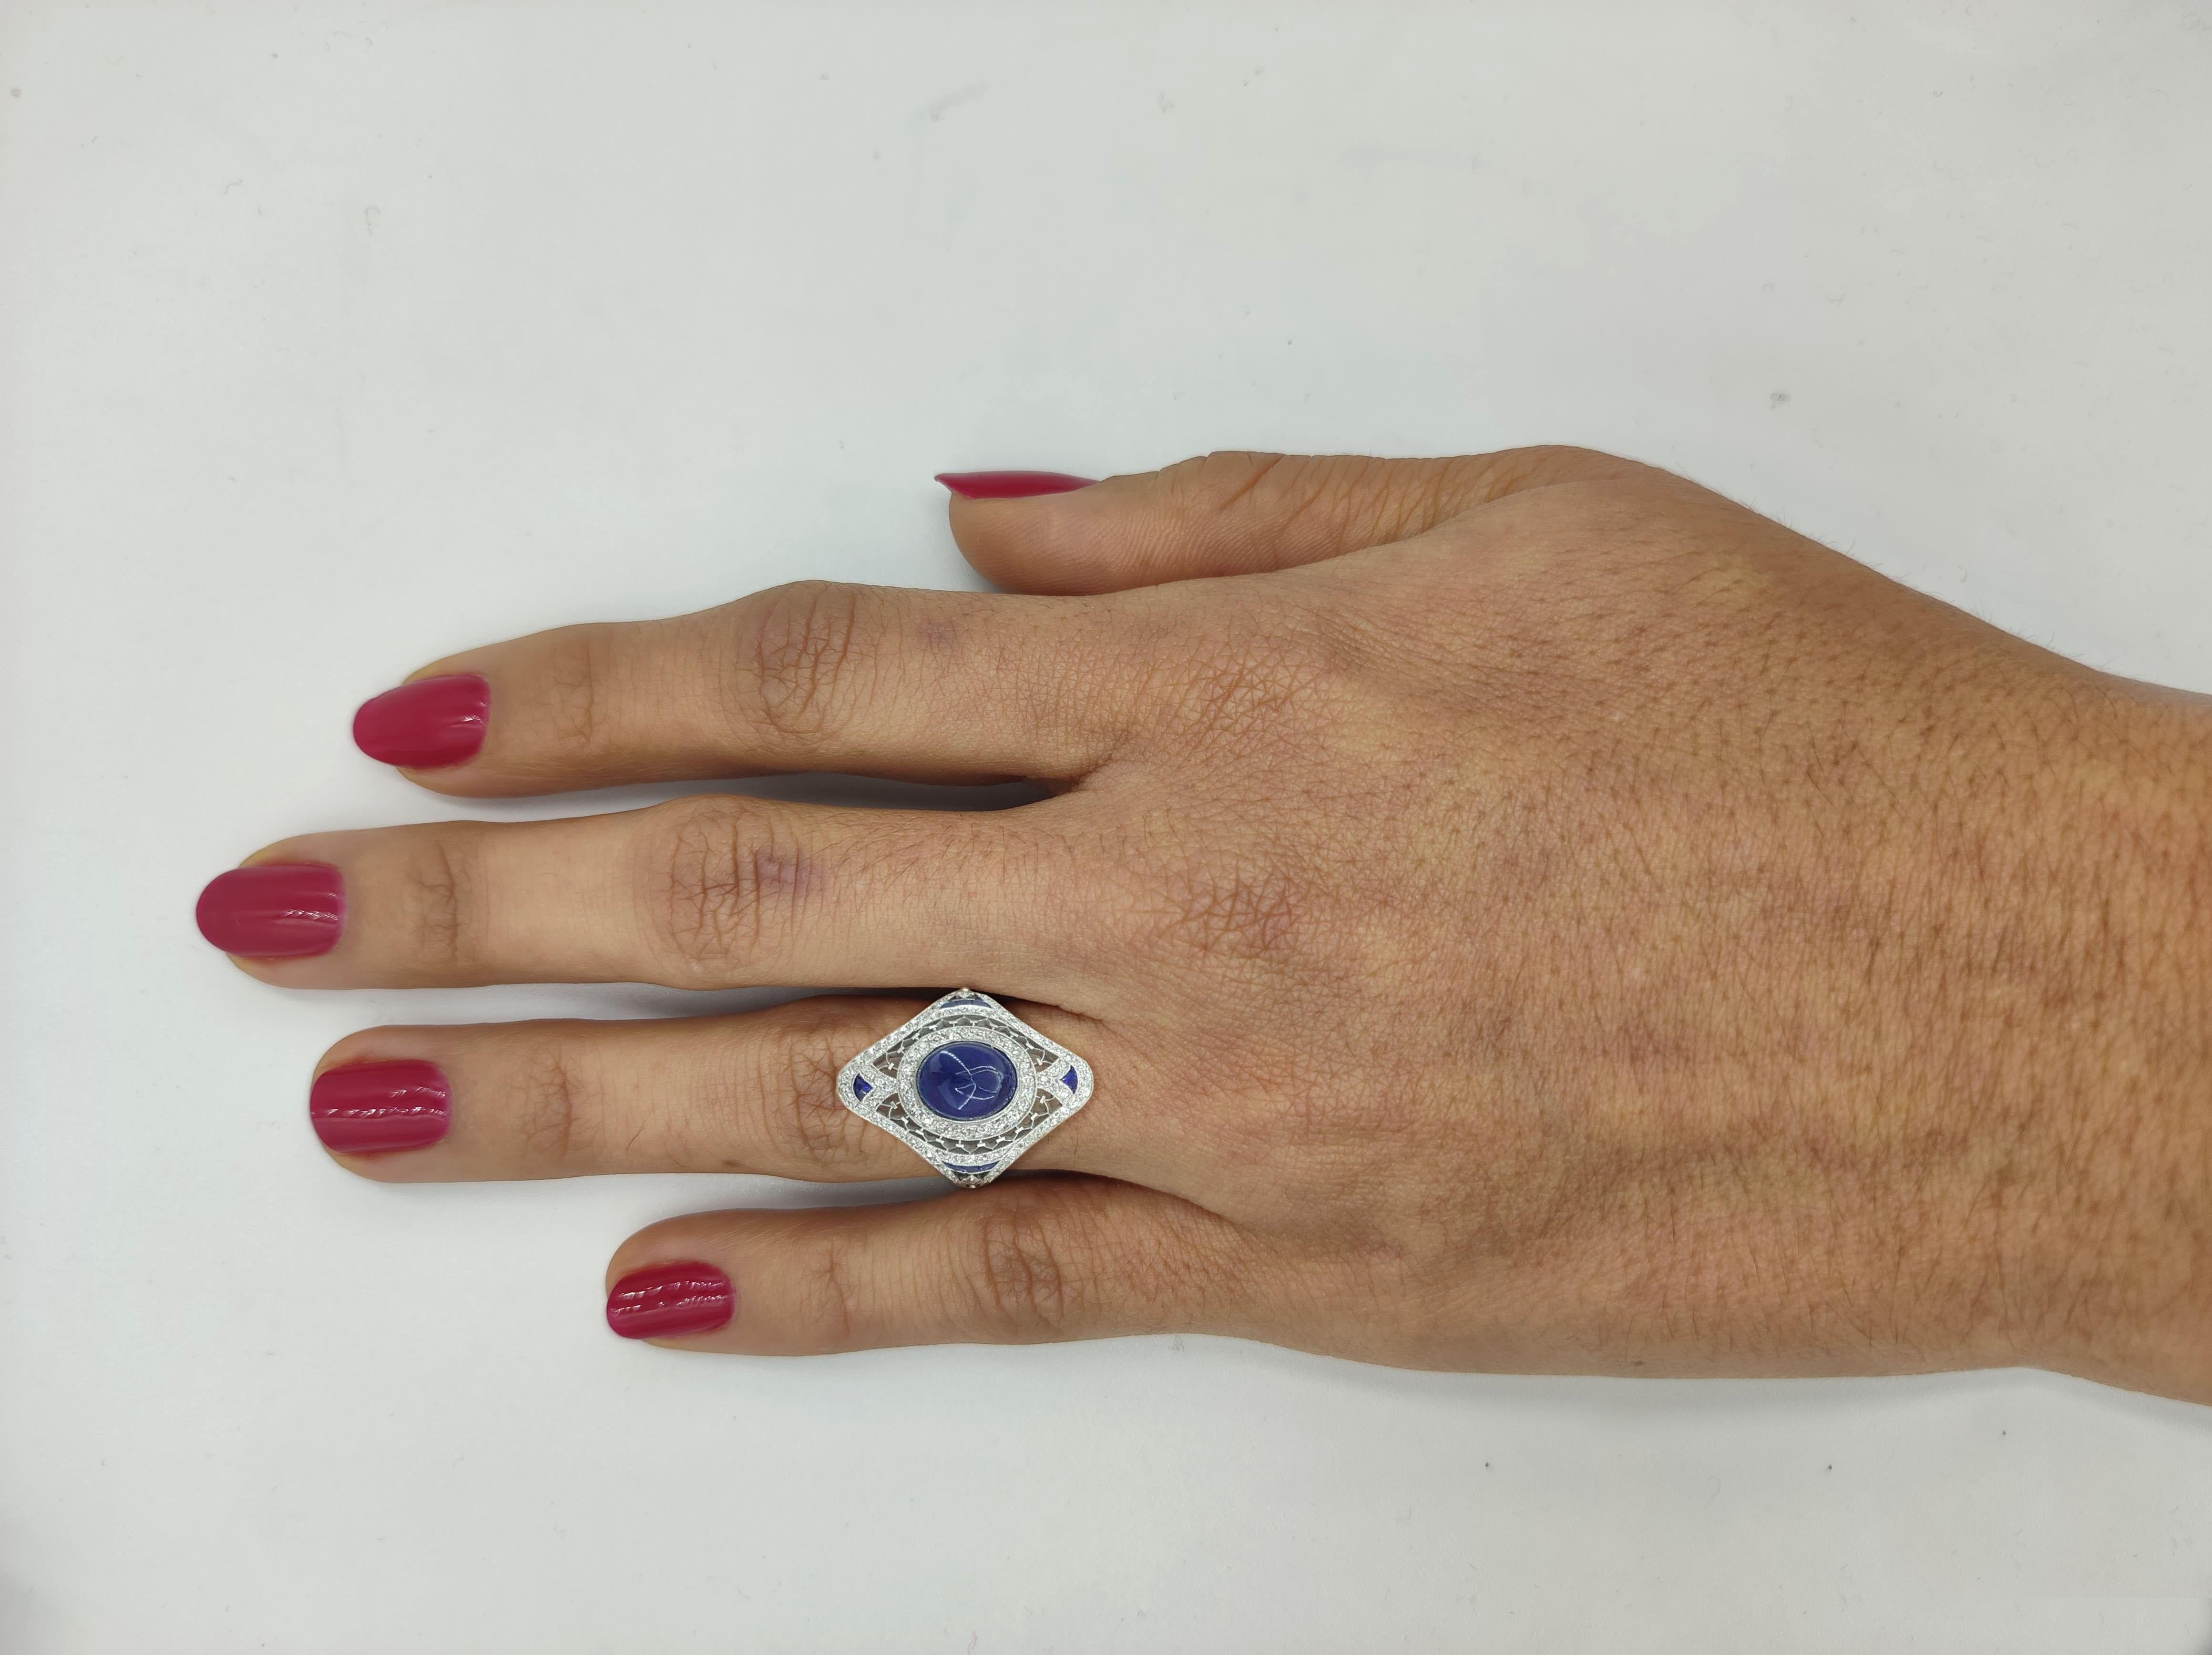 Sugarloaf Cabochon Blue Sapphire & Old European Cut Diamond  Ring. 



The ring weighs 6.2 grams, size 6.25, the Center stone is a natural Sugarloaf Cabochon Shaped Blue Sapphire weighing approximately 5 ct, measuring 9.57x7.70x6.40mm, 8 custom cut